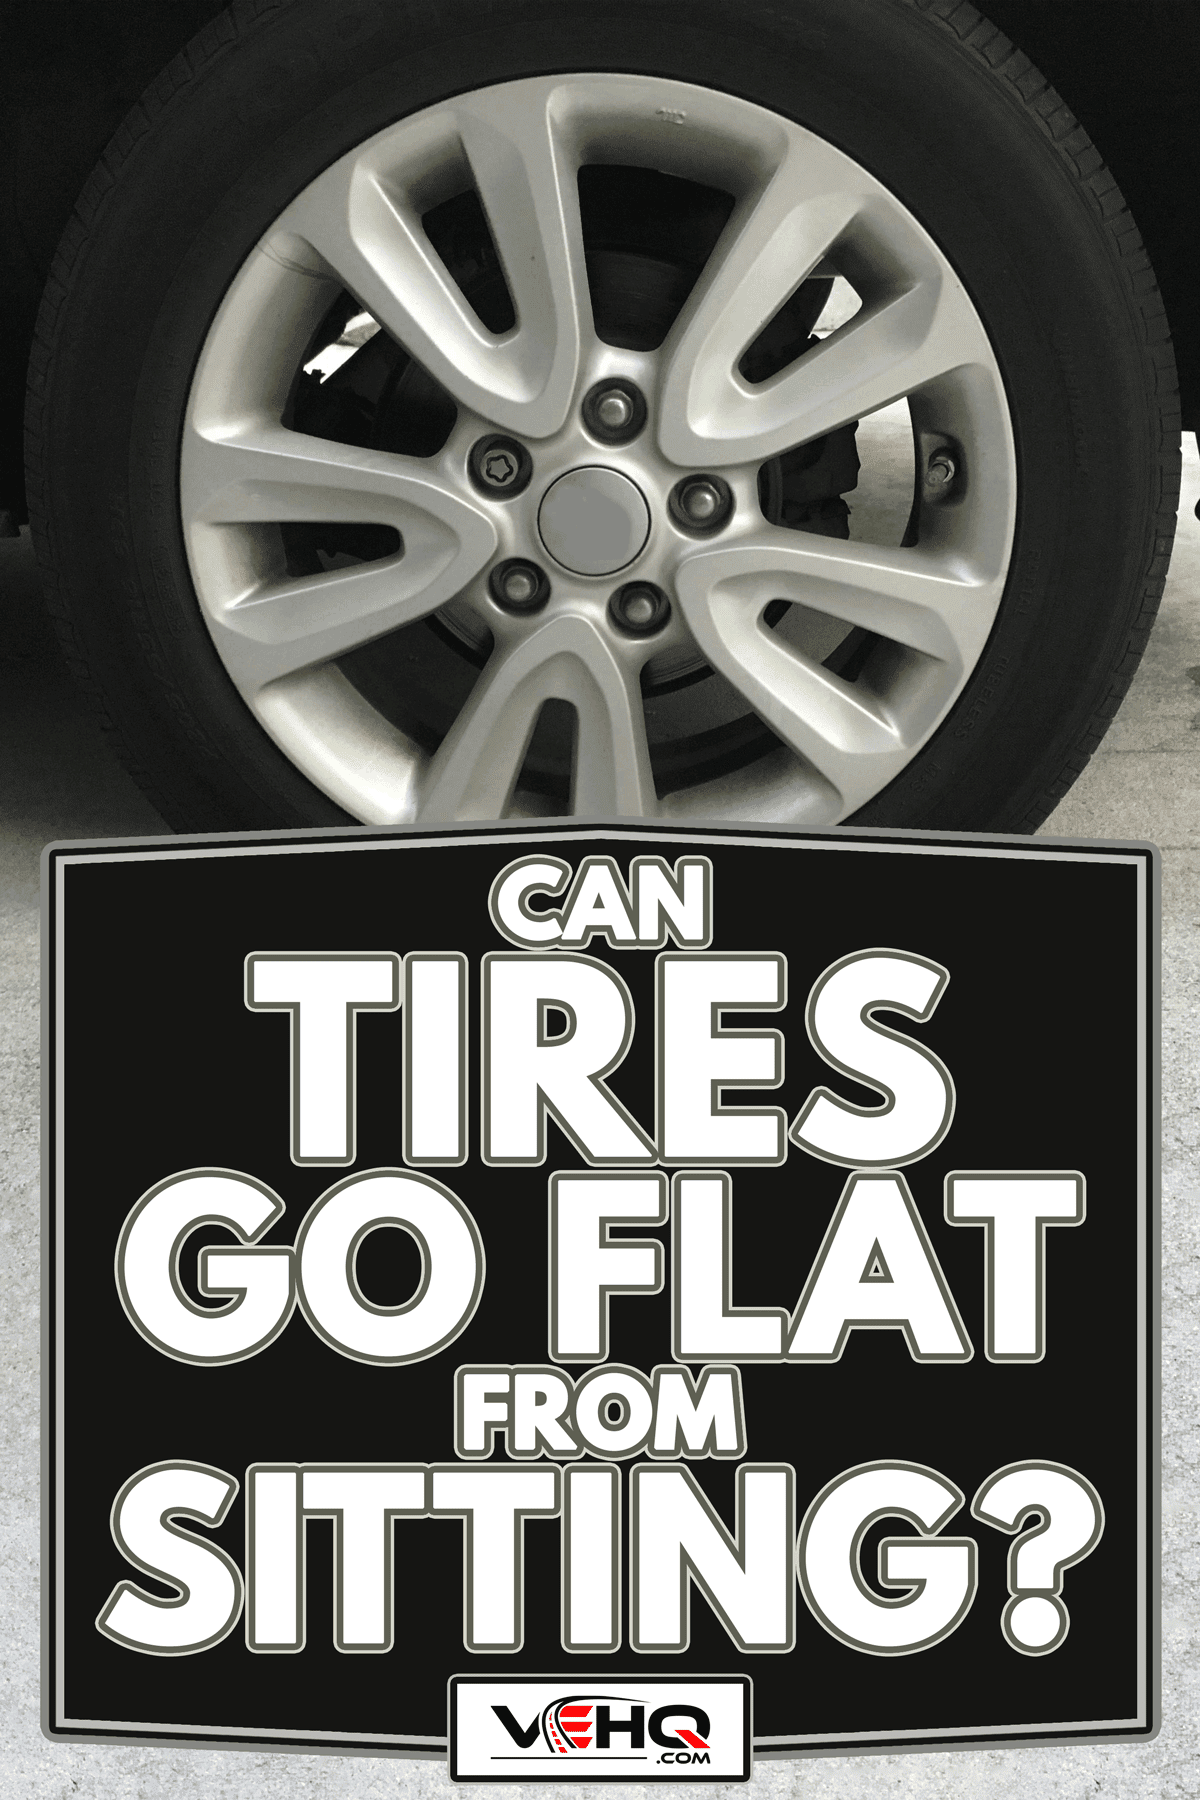 Flat tire in the morning, Can Tires Go Flat From Sitting?